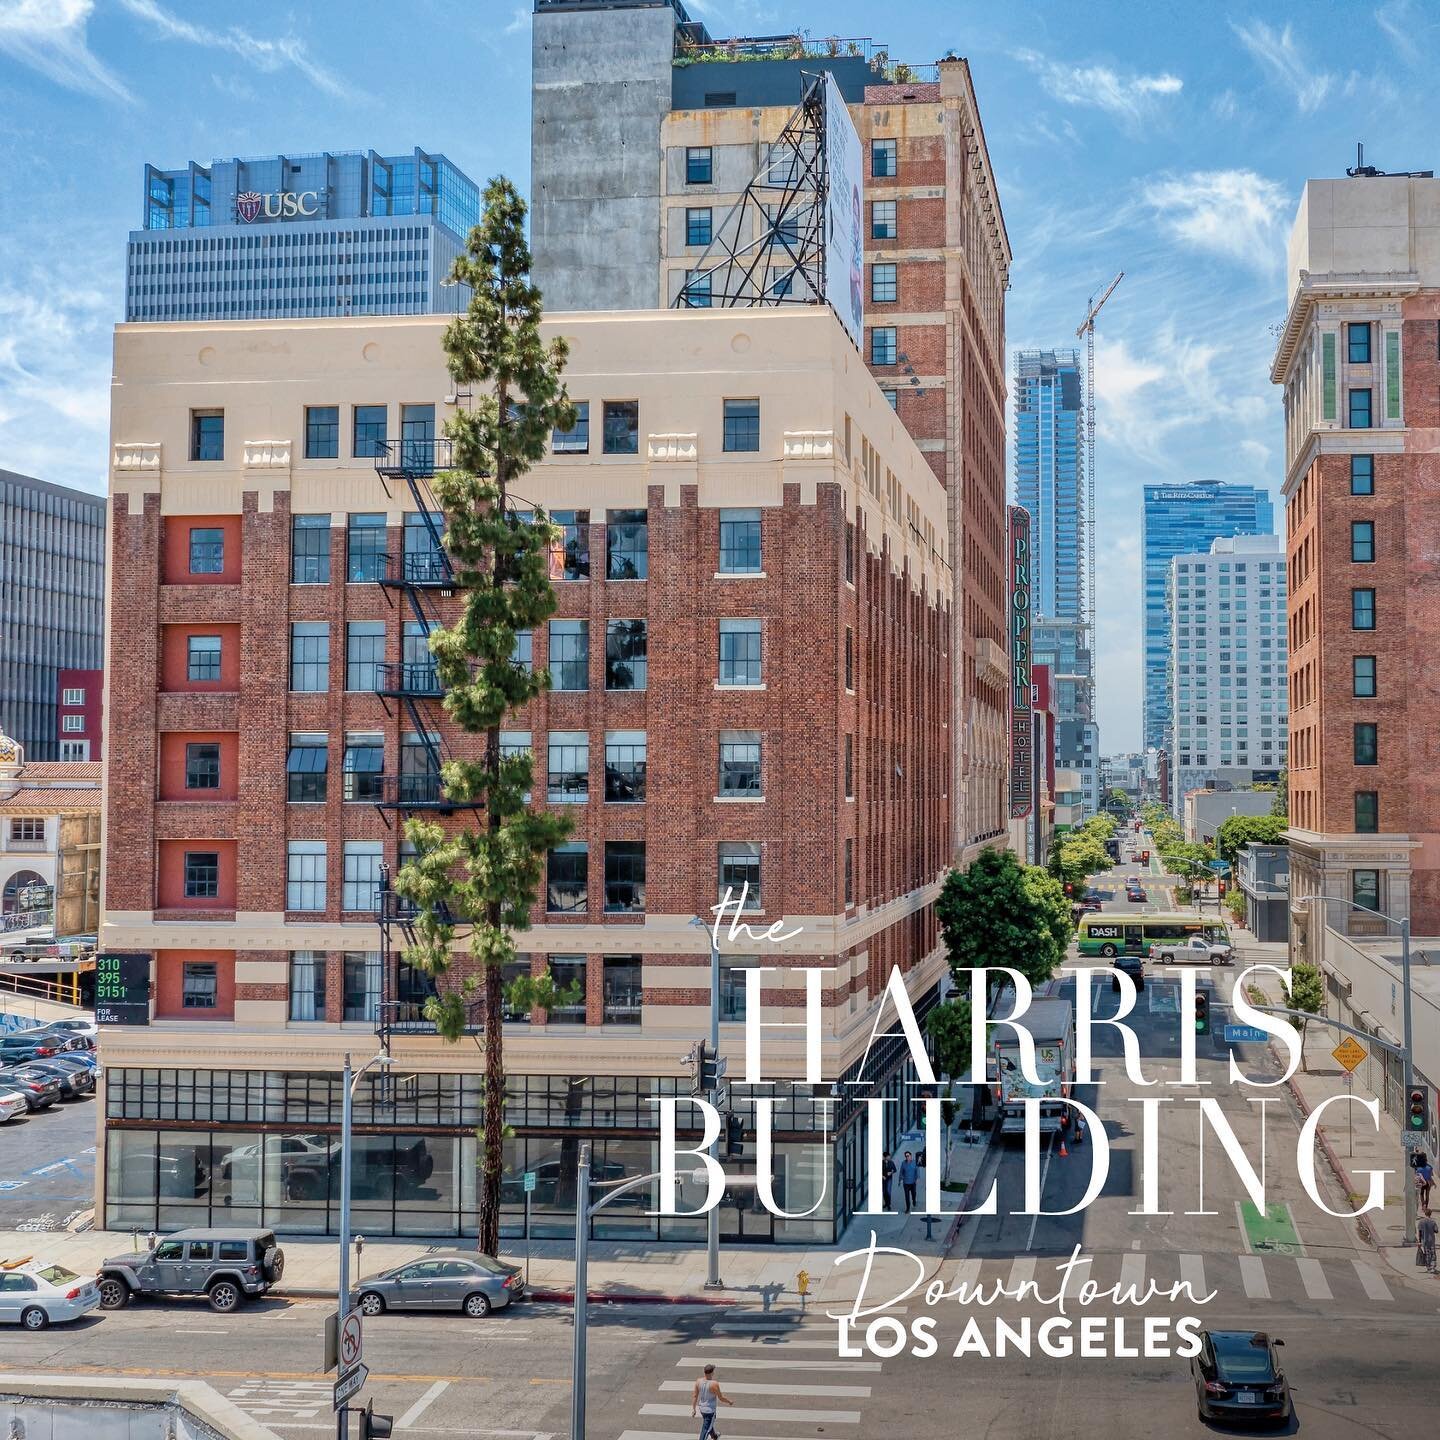 FOR SALE: 110 W 11th Street, Historic DTLA // Rare Opportunity to acquire a renovated Creative Office asset with established tenant base.

* Building Size: 58,633 SF
* Penthouse Space is available providing one of the most spectacular full floor spac